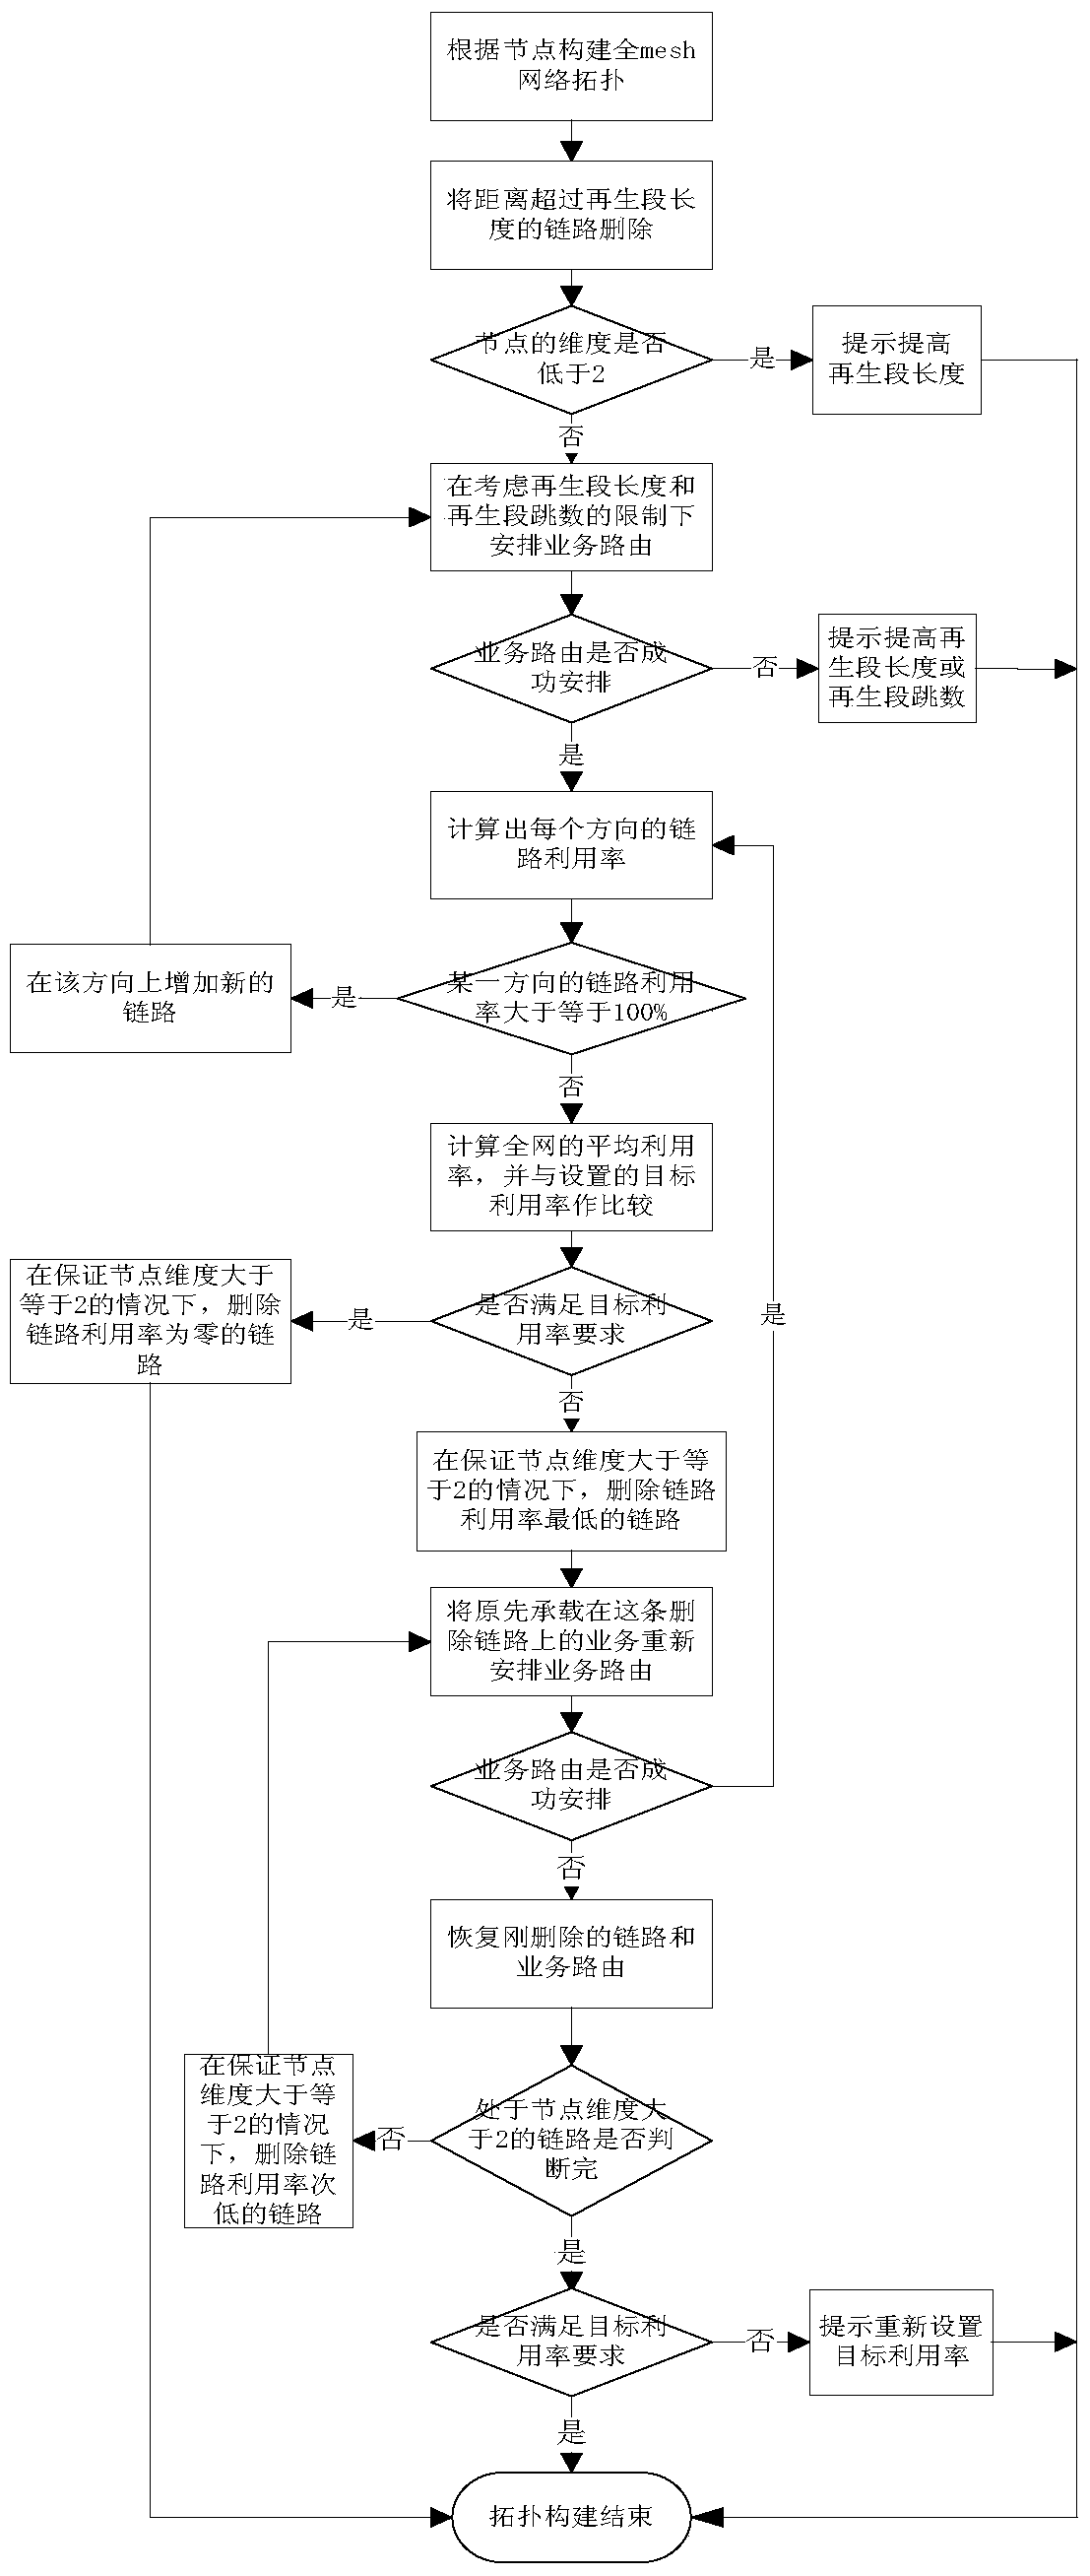 Computer Automatic Construction Method of Optical Network Topology